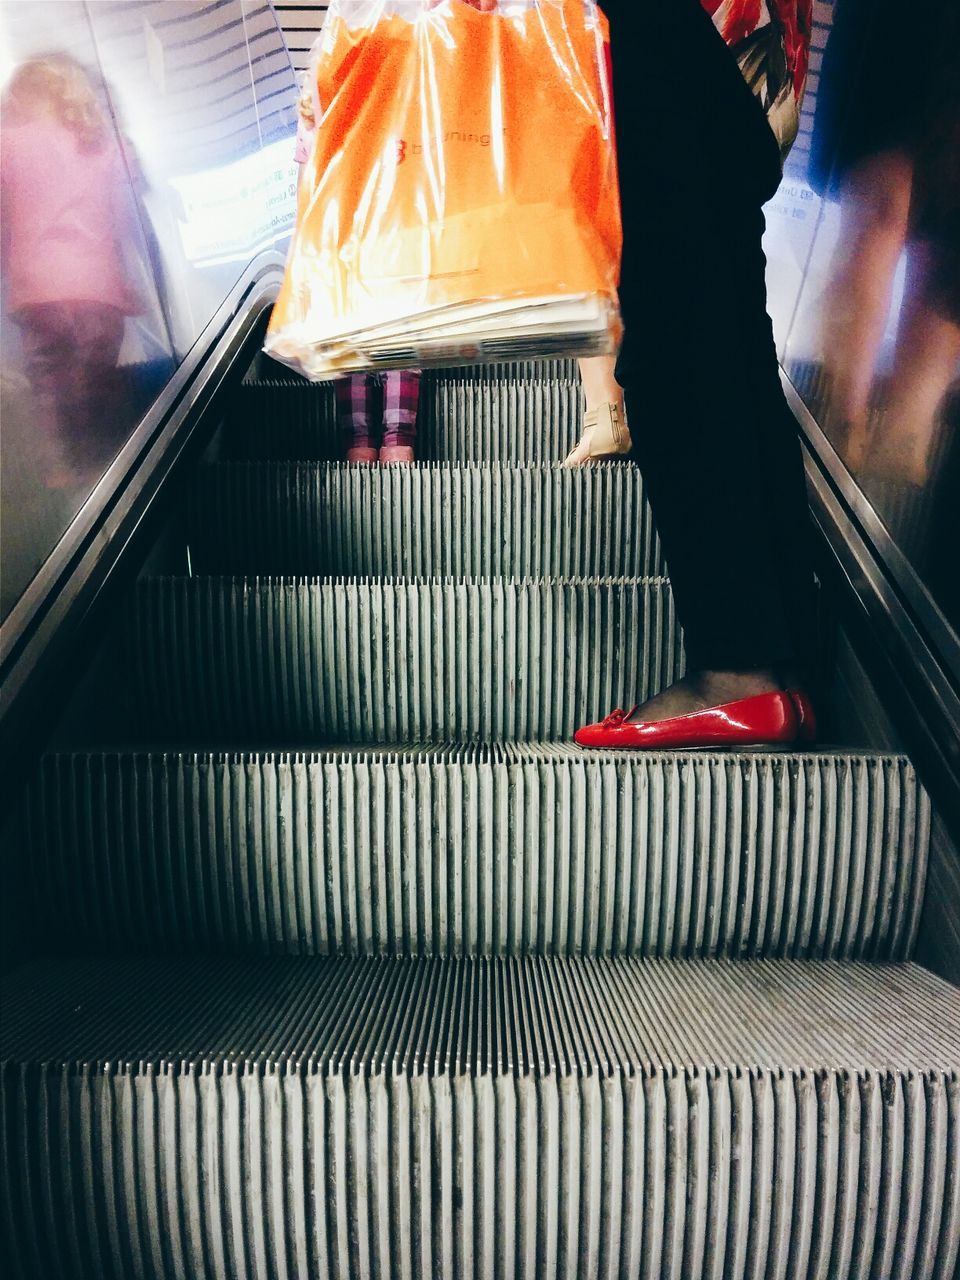 Low section of two people standing on escalator